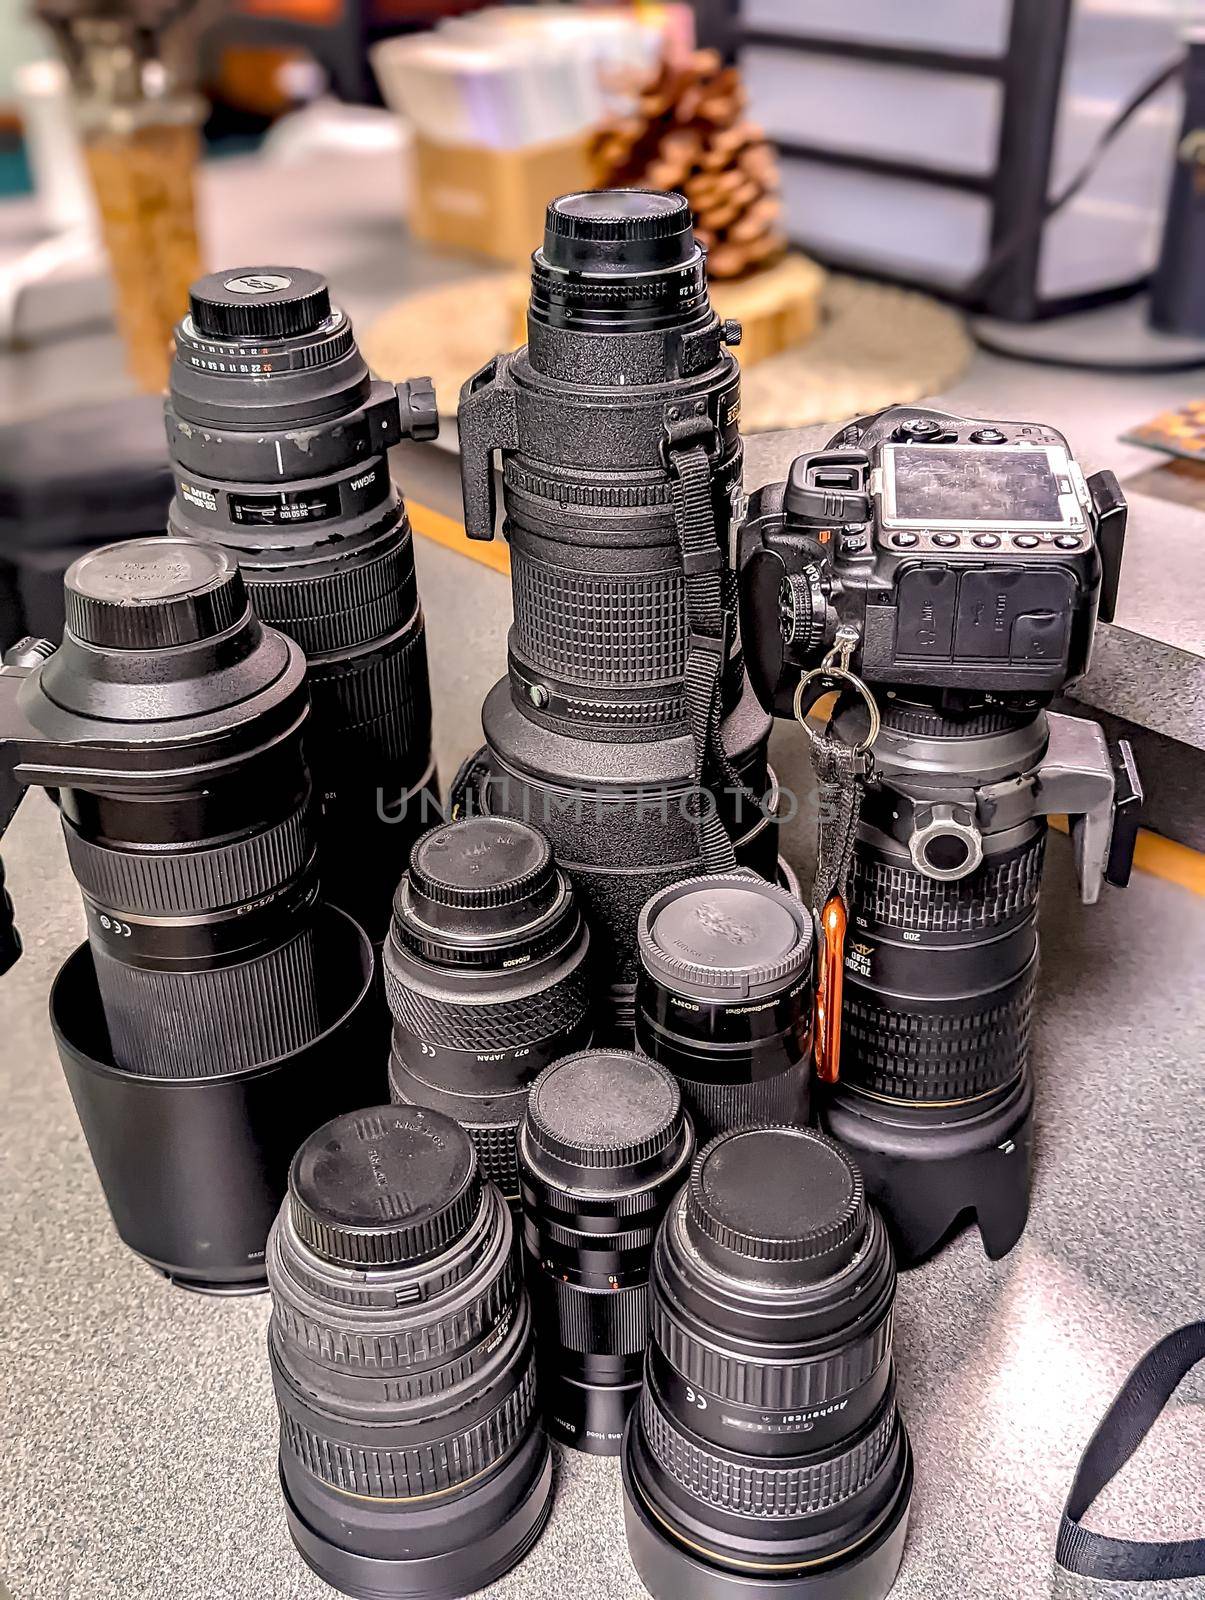 photography equipment and lens collection by digidreamgrafix